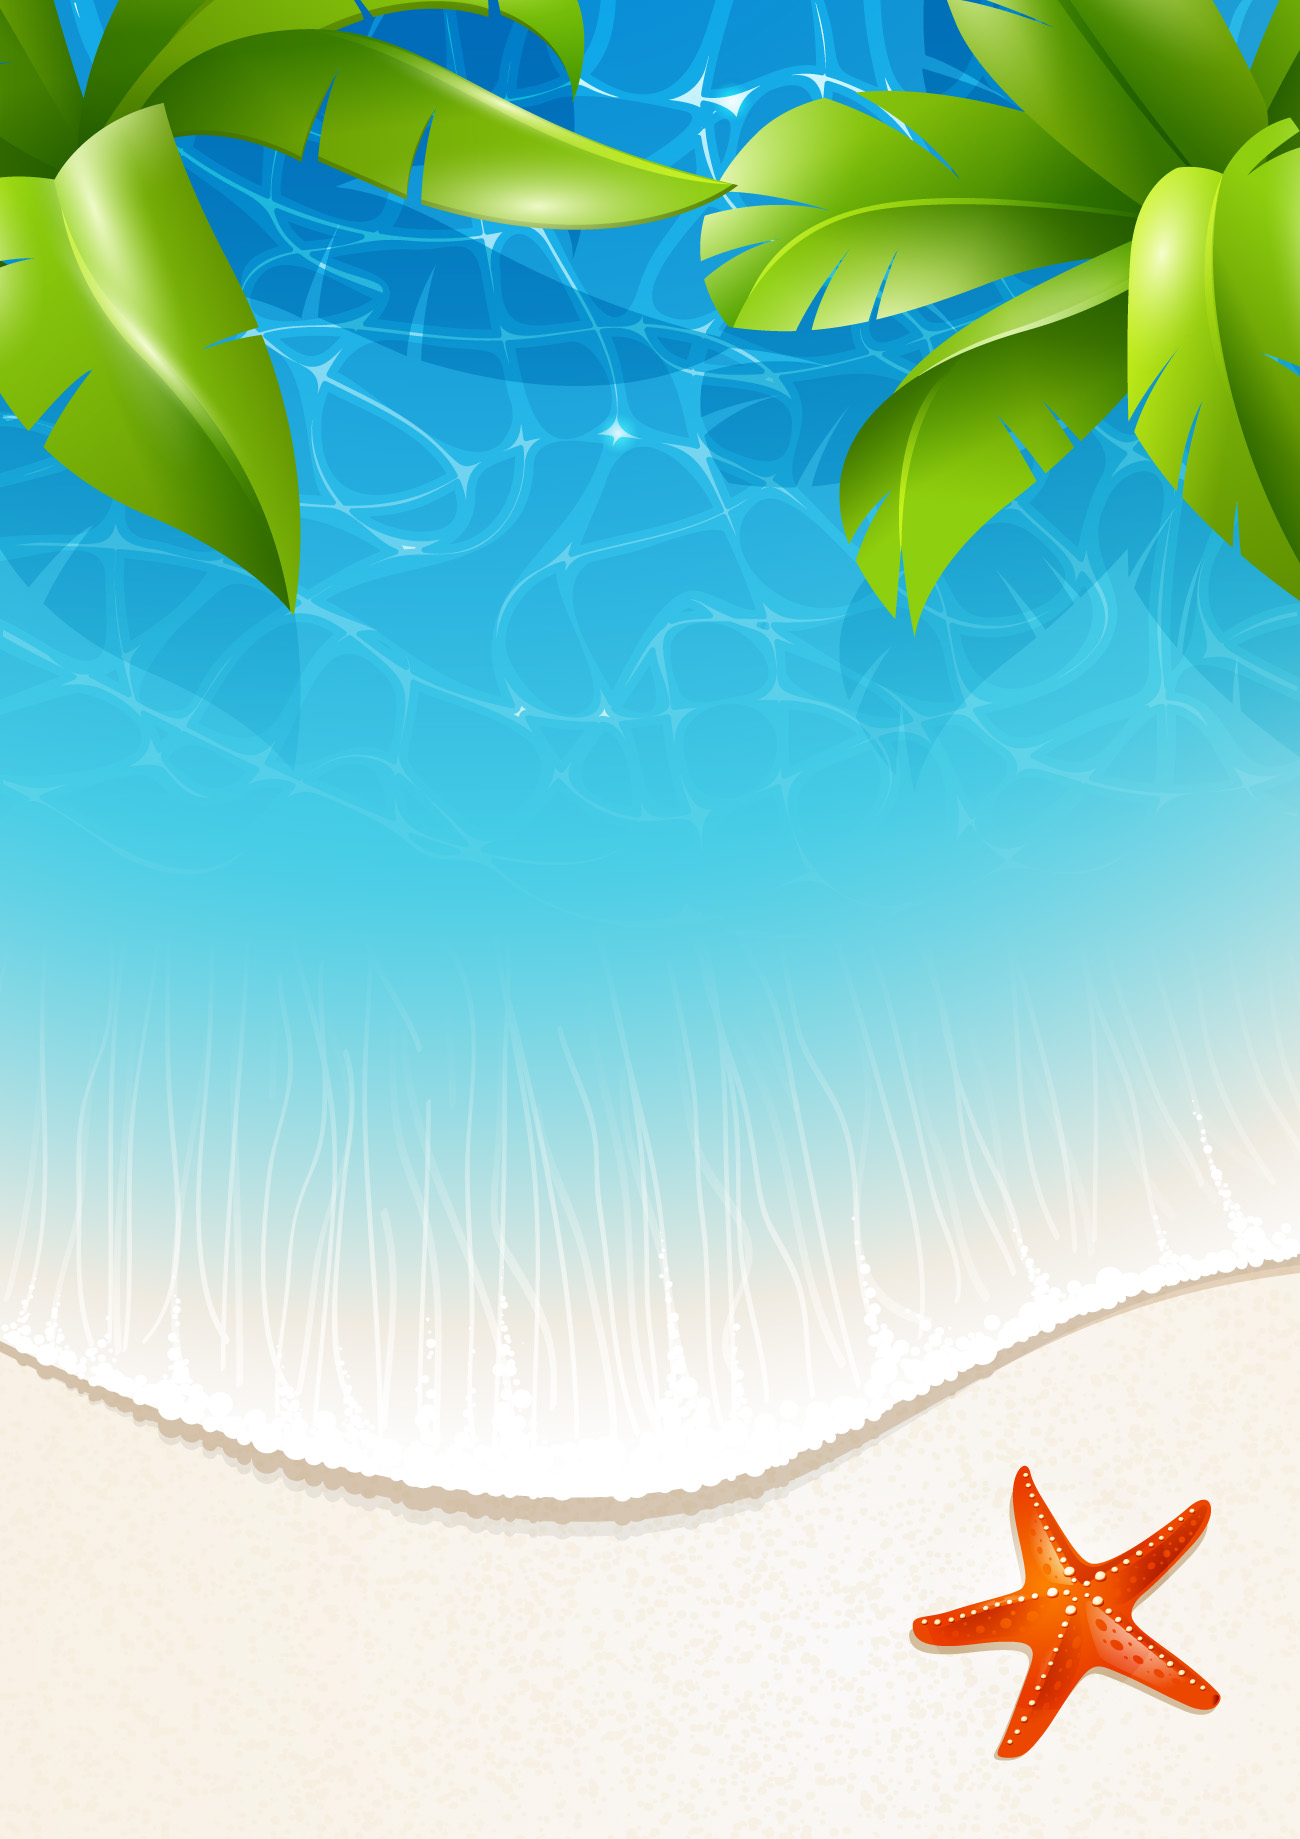 Beautiful Tropical Backgrounds vector 03  